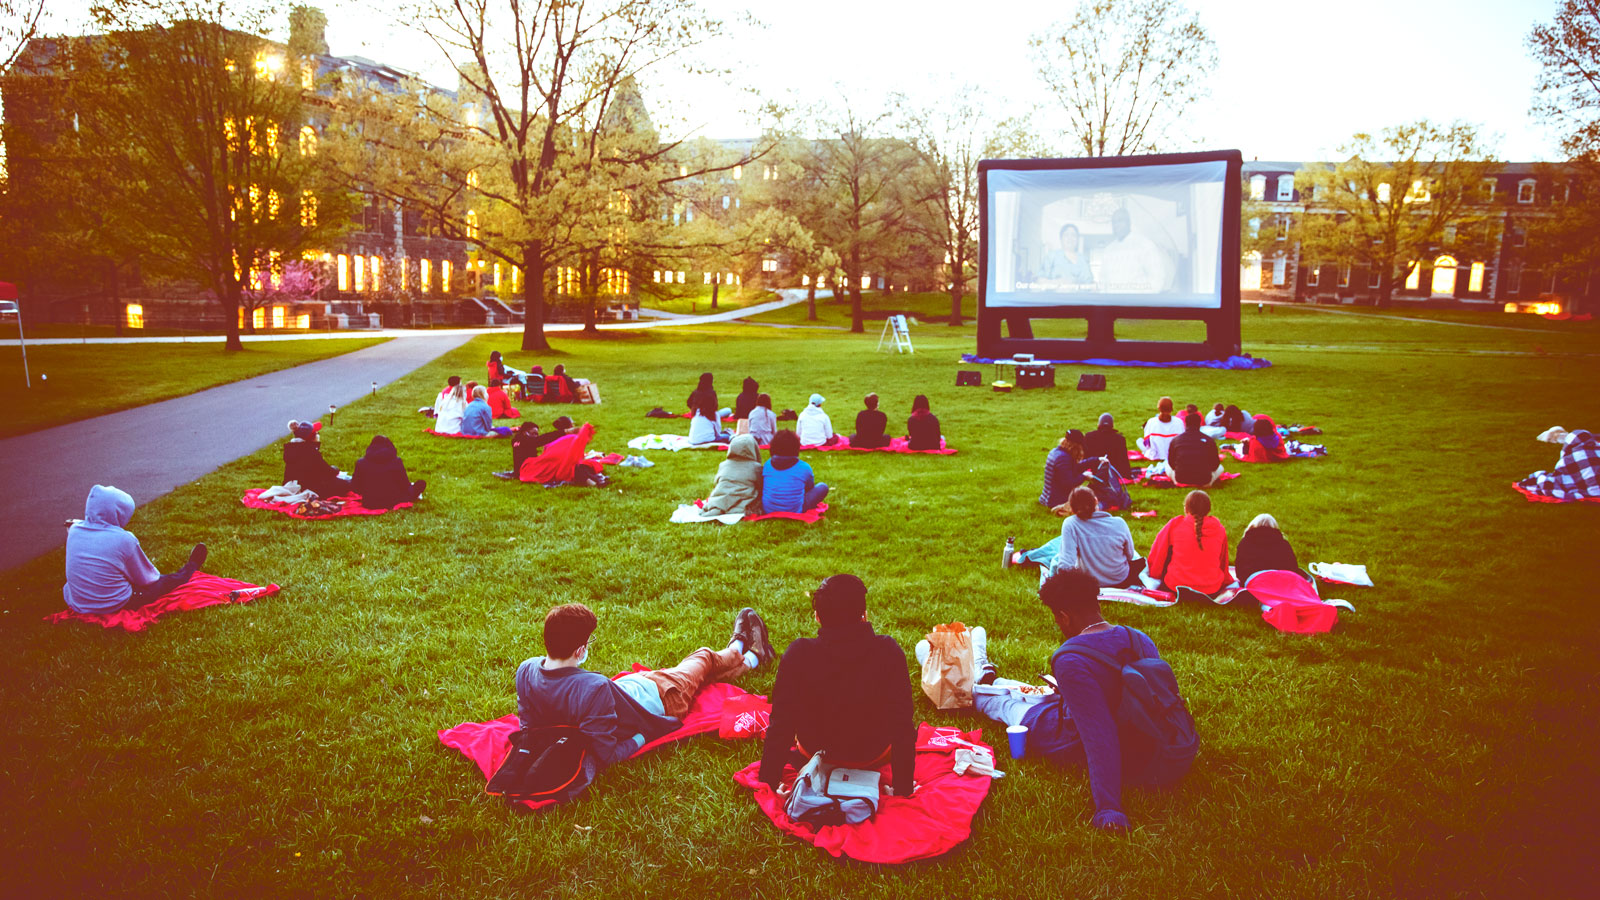 People sitting on the grass watching a movie